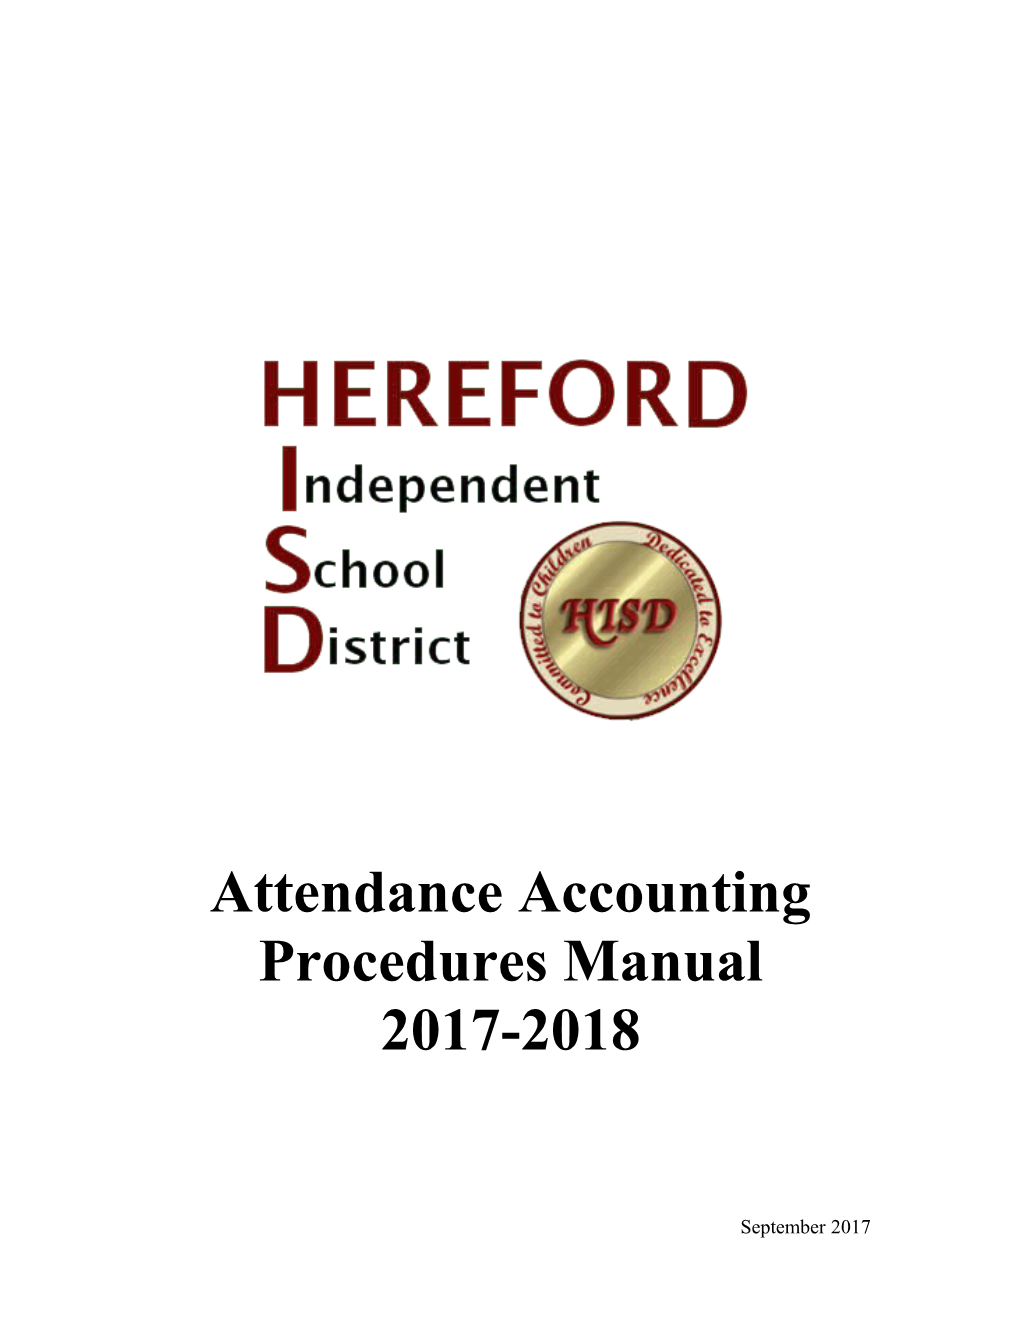 Attendance Accounting Procedures Manual